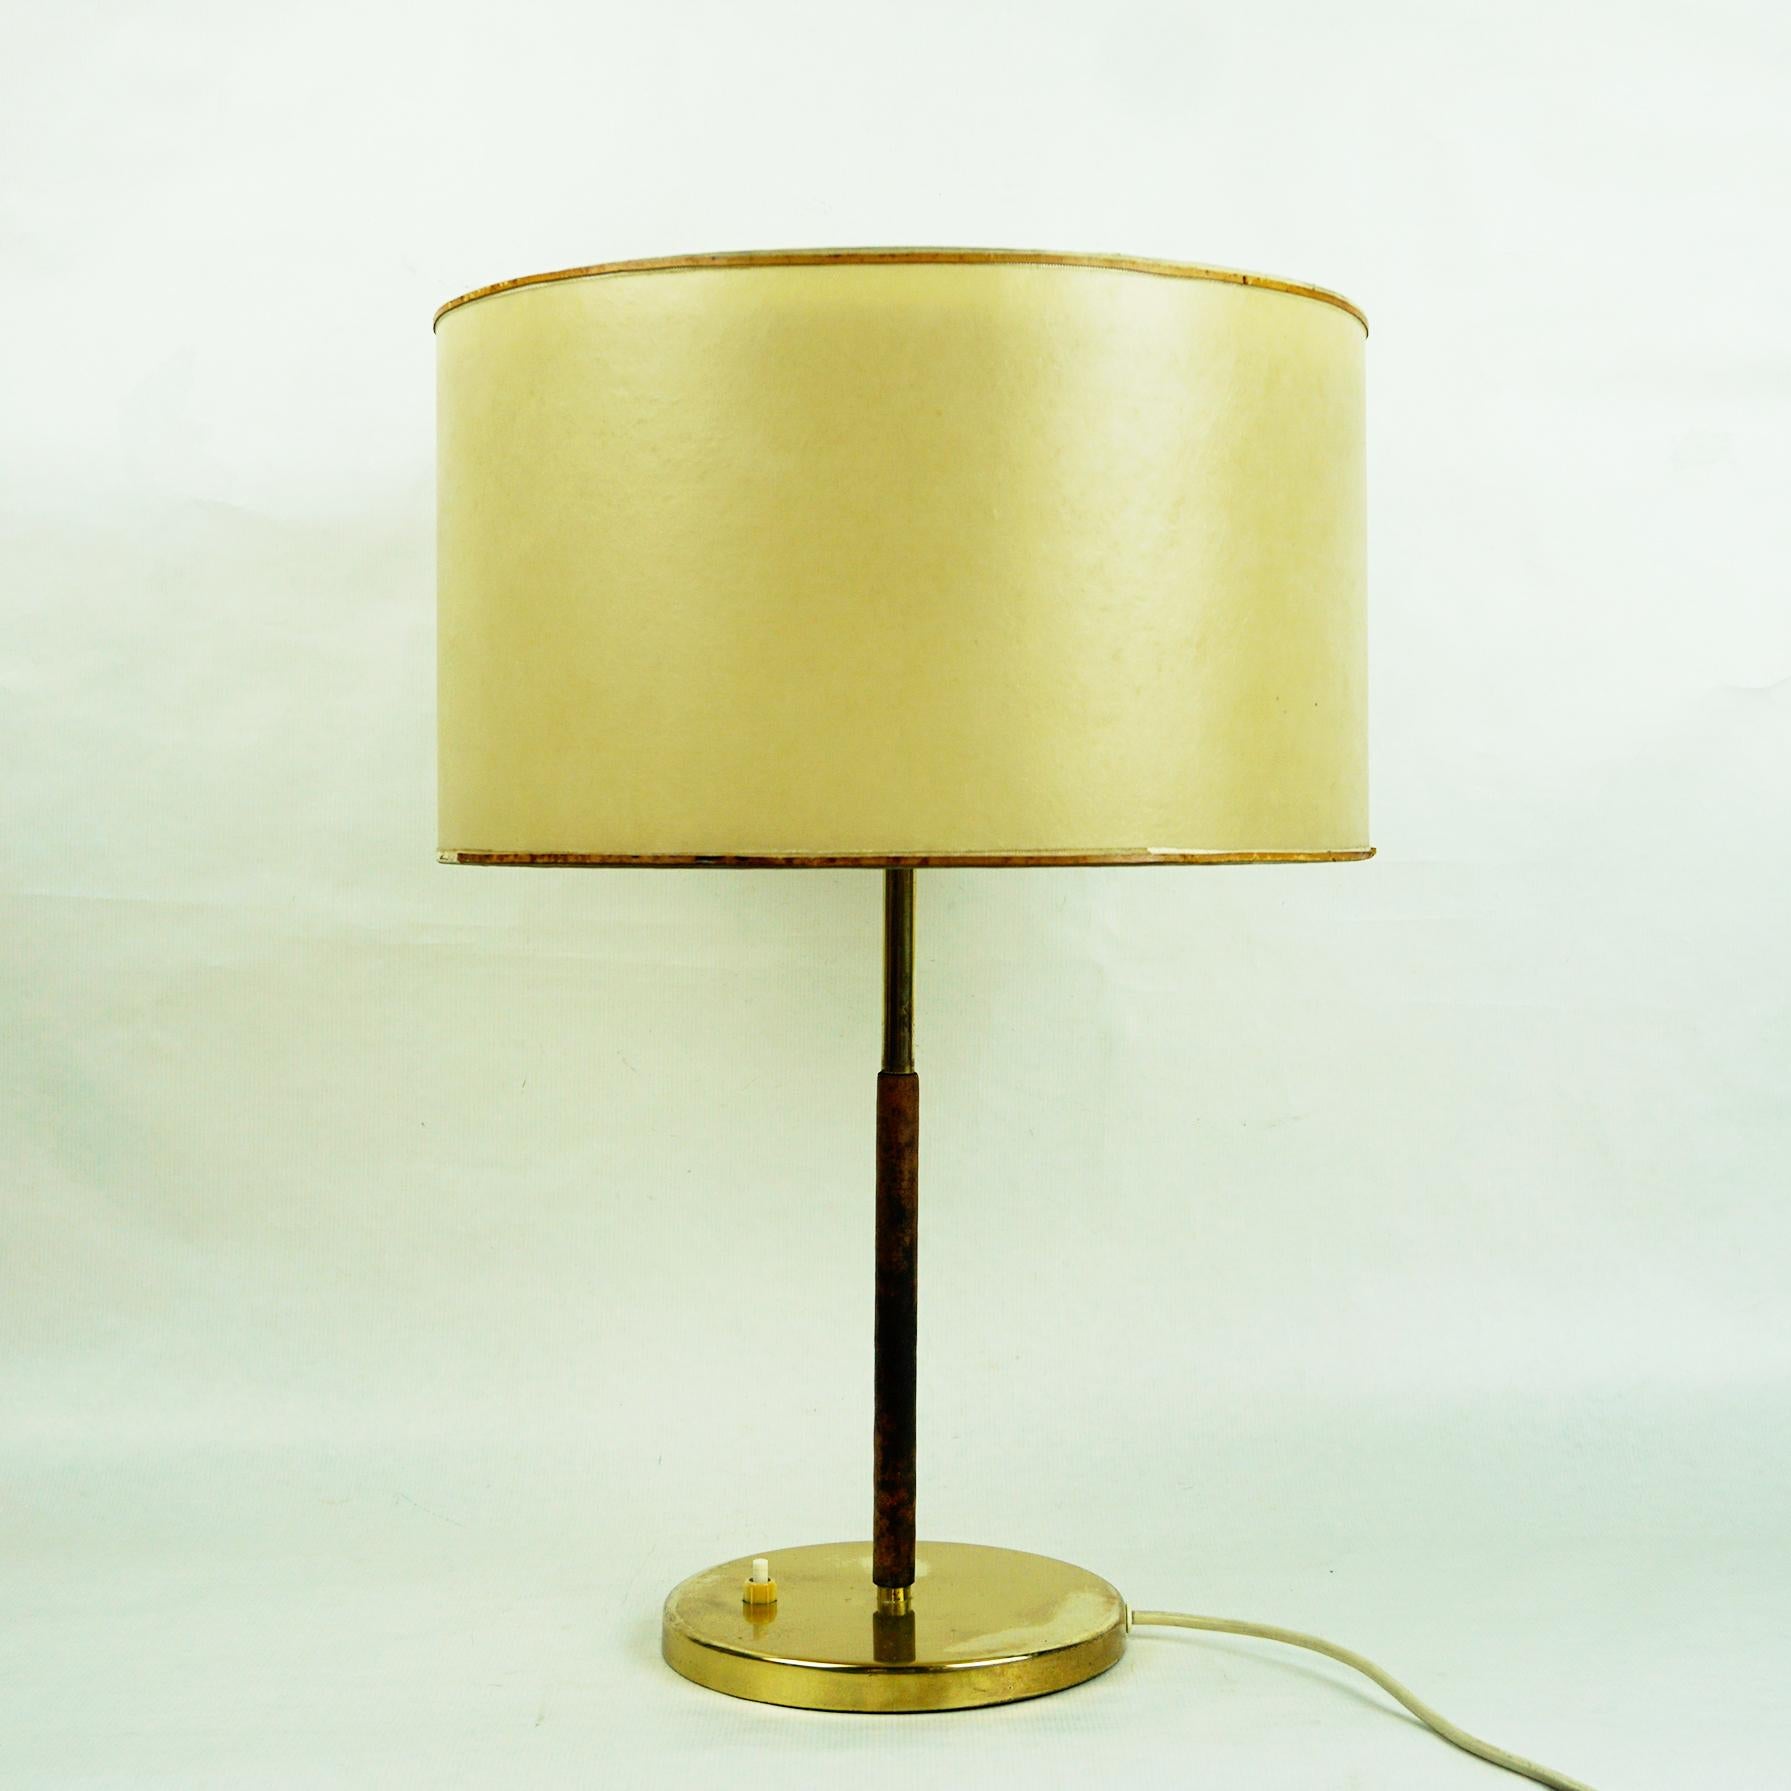 This excellent Austrian Midcentury brass and leather table lamp was designed 1965 and manufactured by J.T. Kalmar Vienna. The model name is Essen, mod. no is 1268.
It features a circular brass base and the stem is covered with cognac coloured